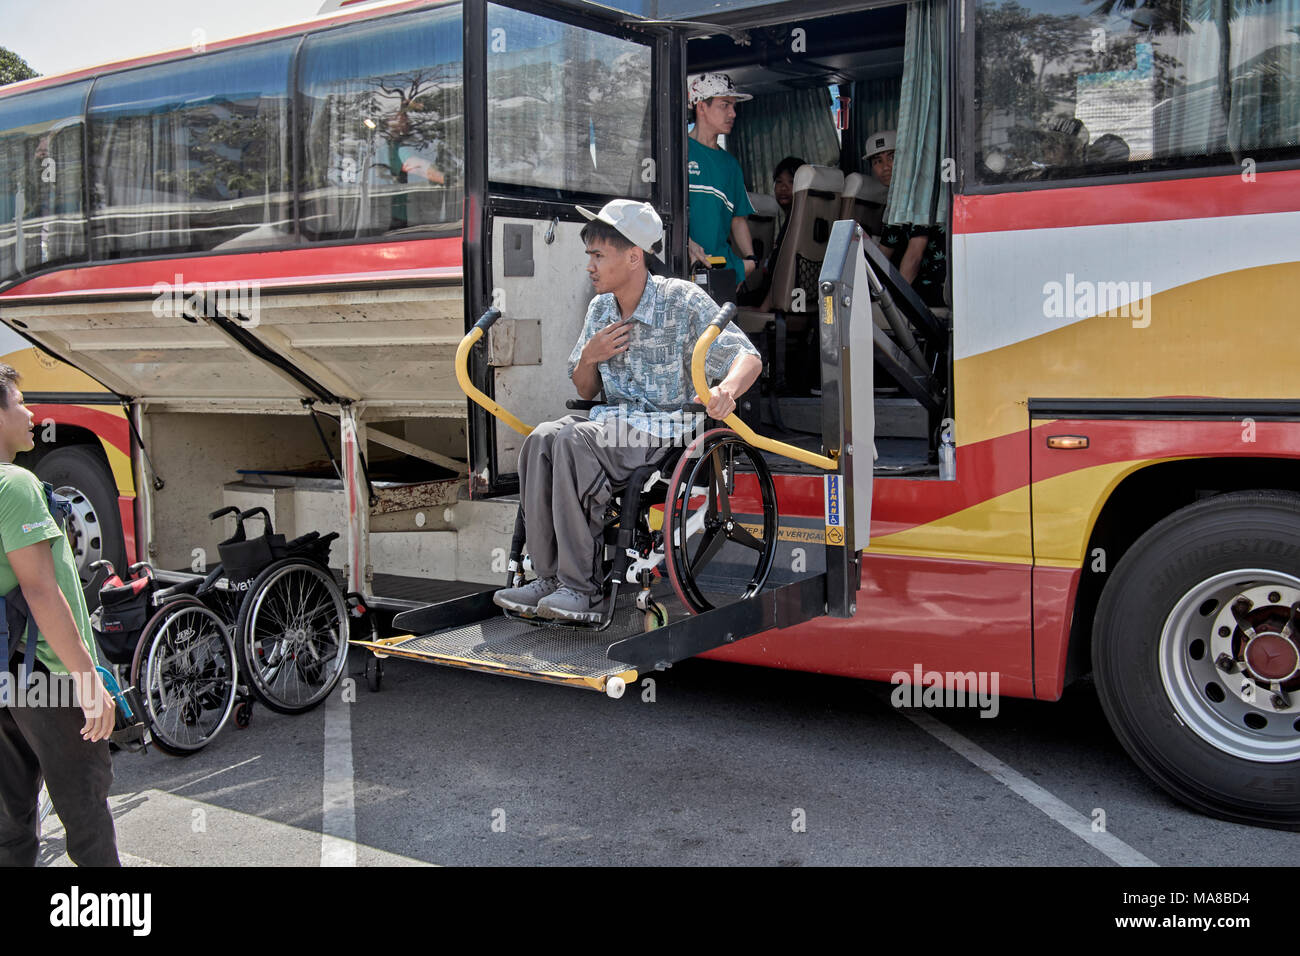 Wheelchair lift (from school bus) - Mobility & Disability - Austin